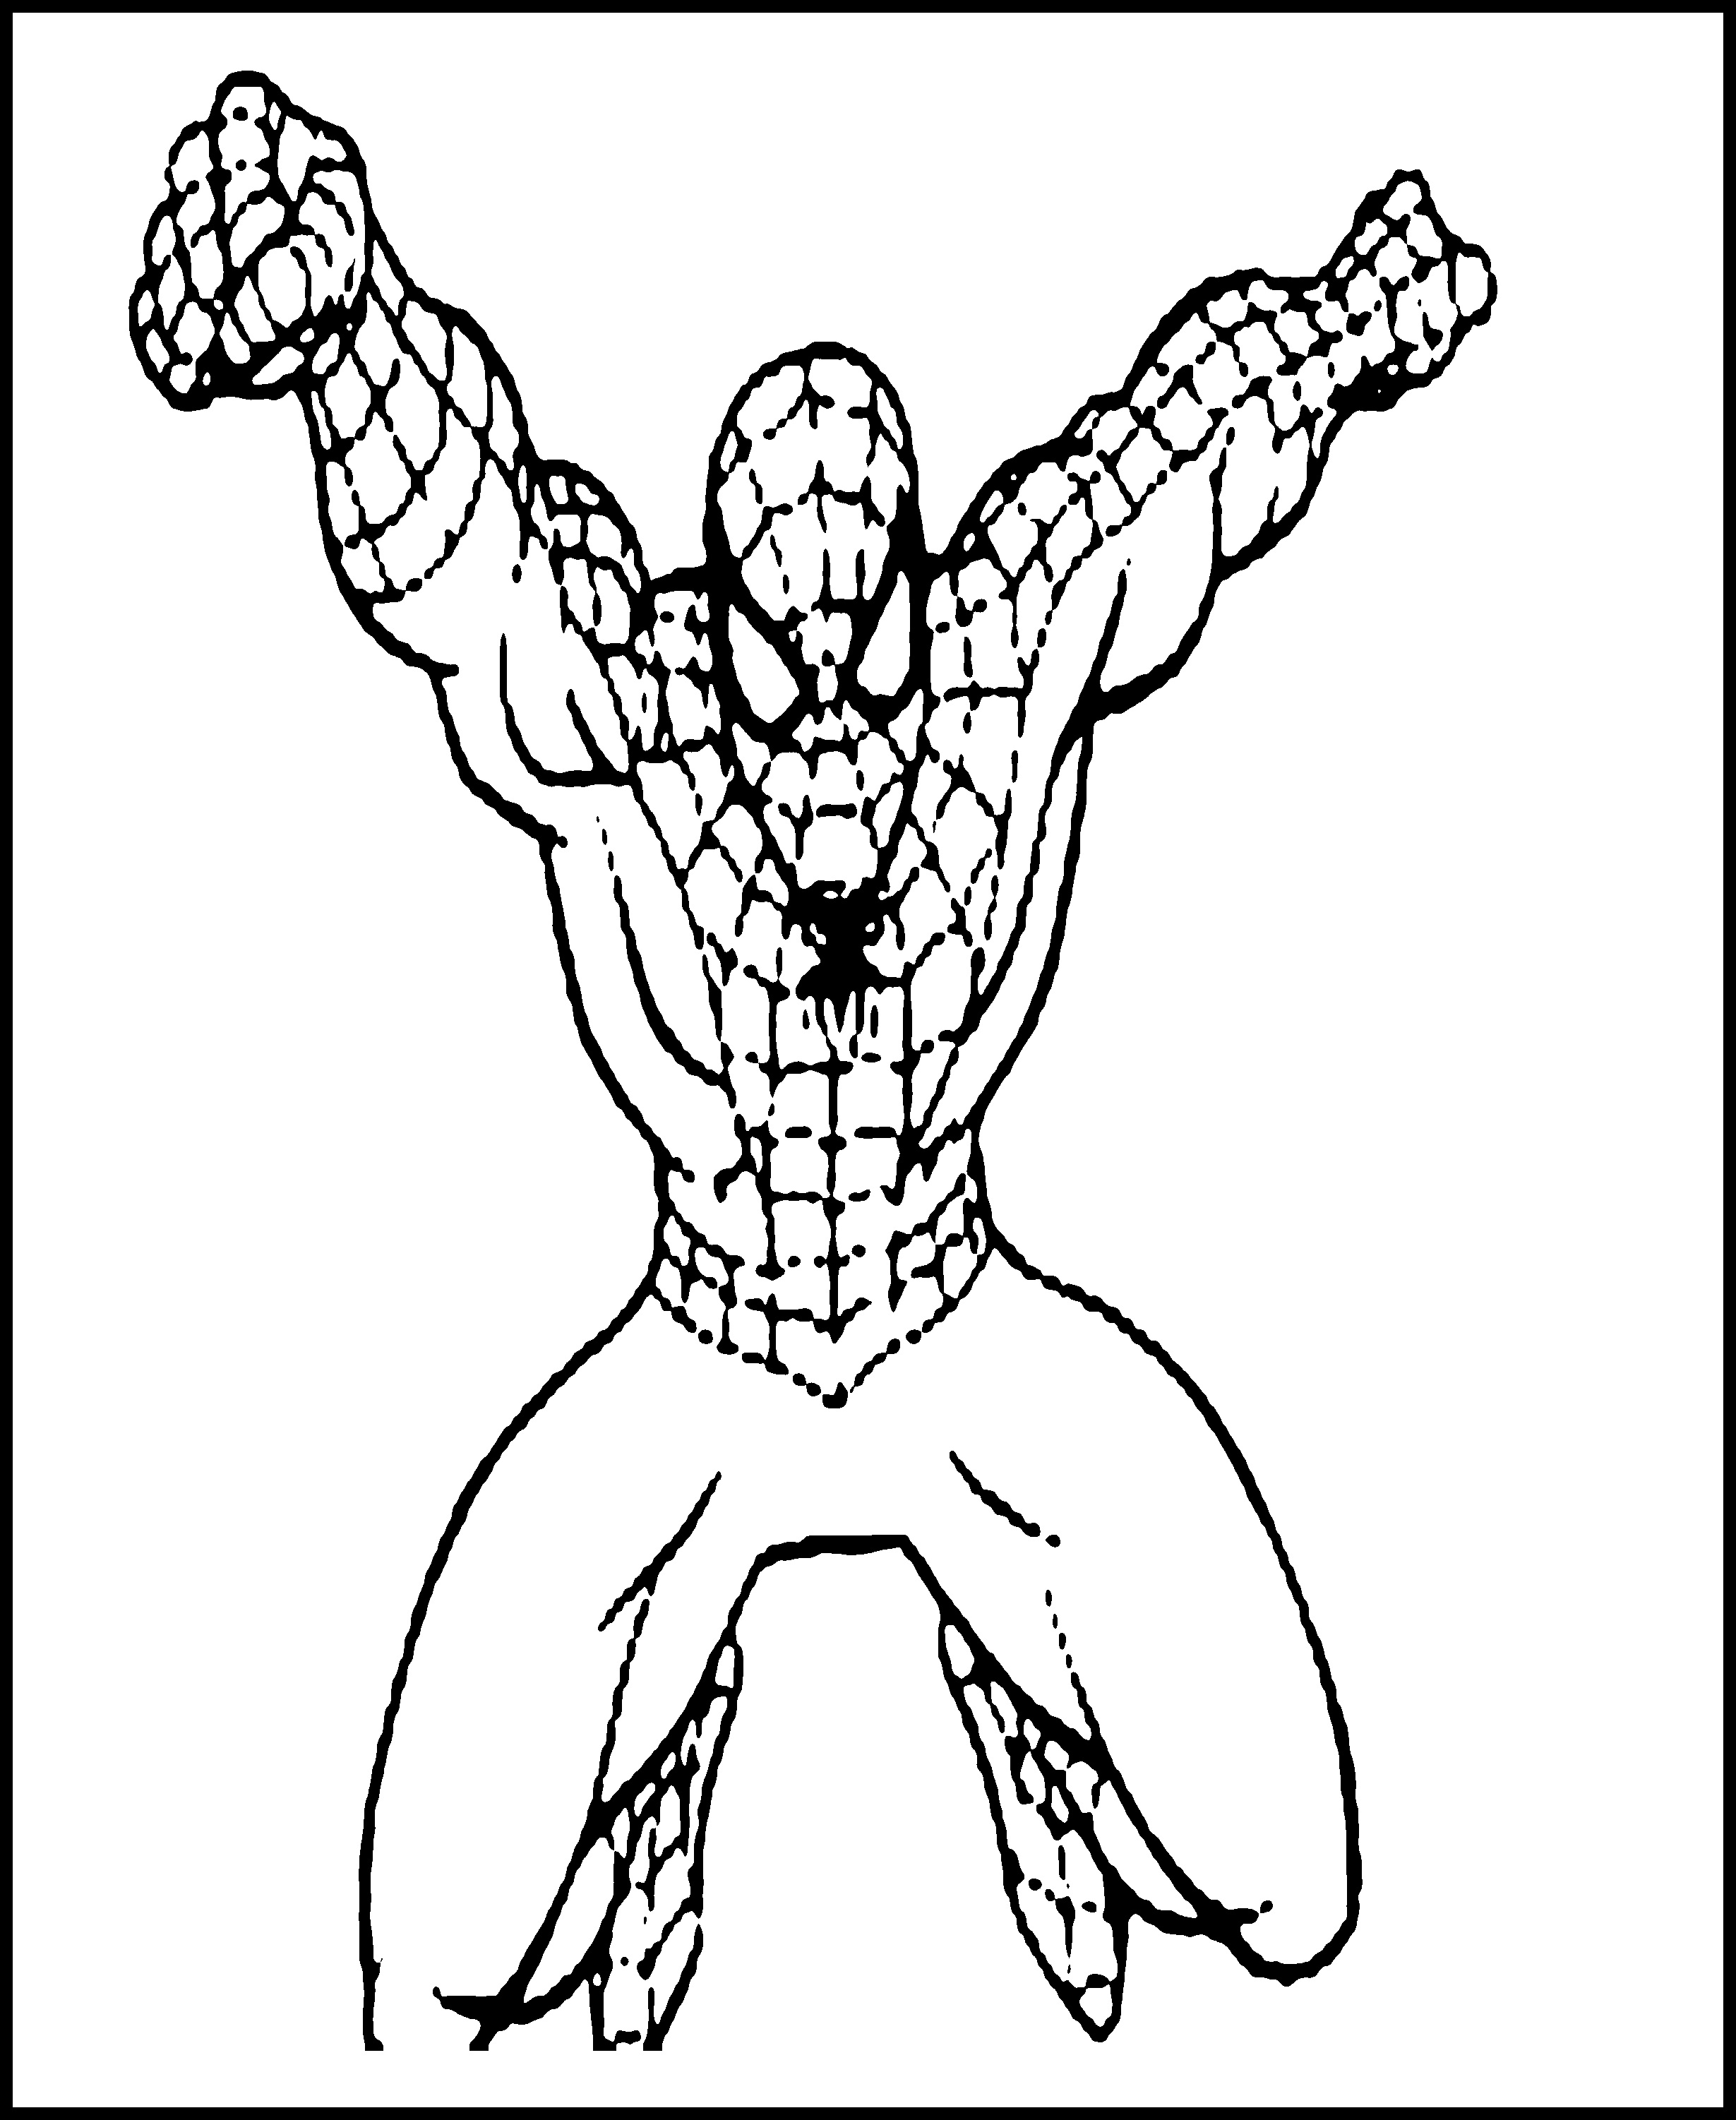  Spiderman Coloring pages | Coloring page | FREE Coloring pages for kids | #4